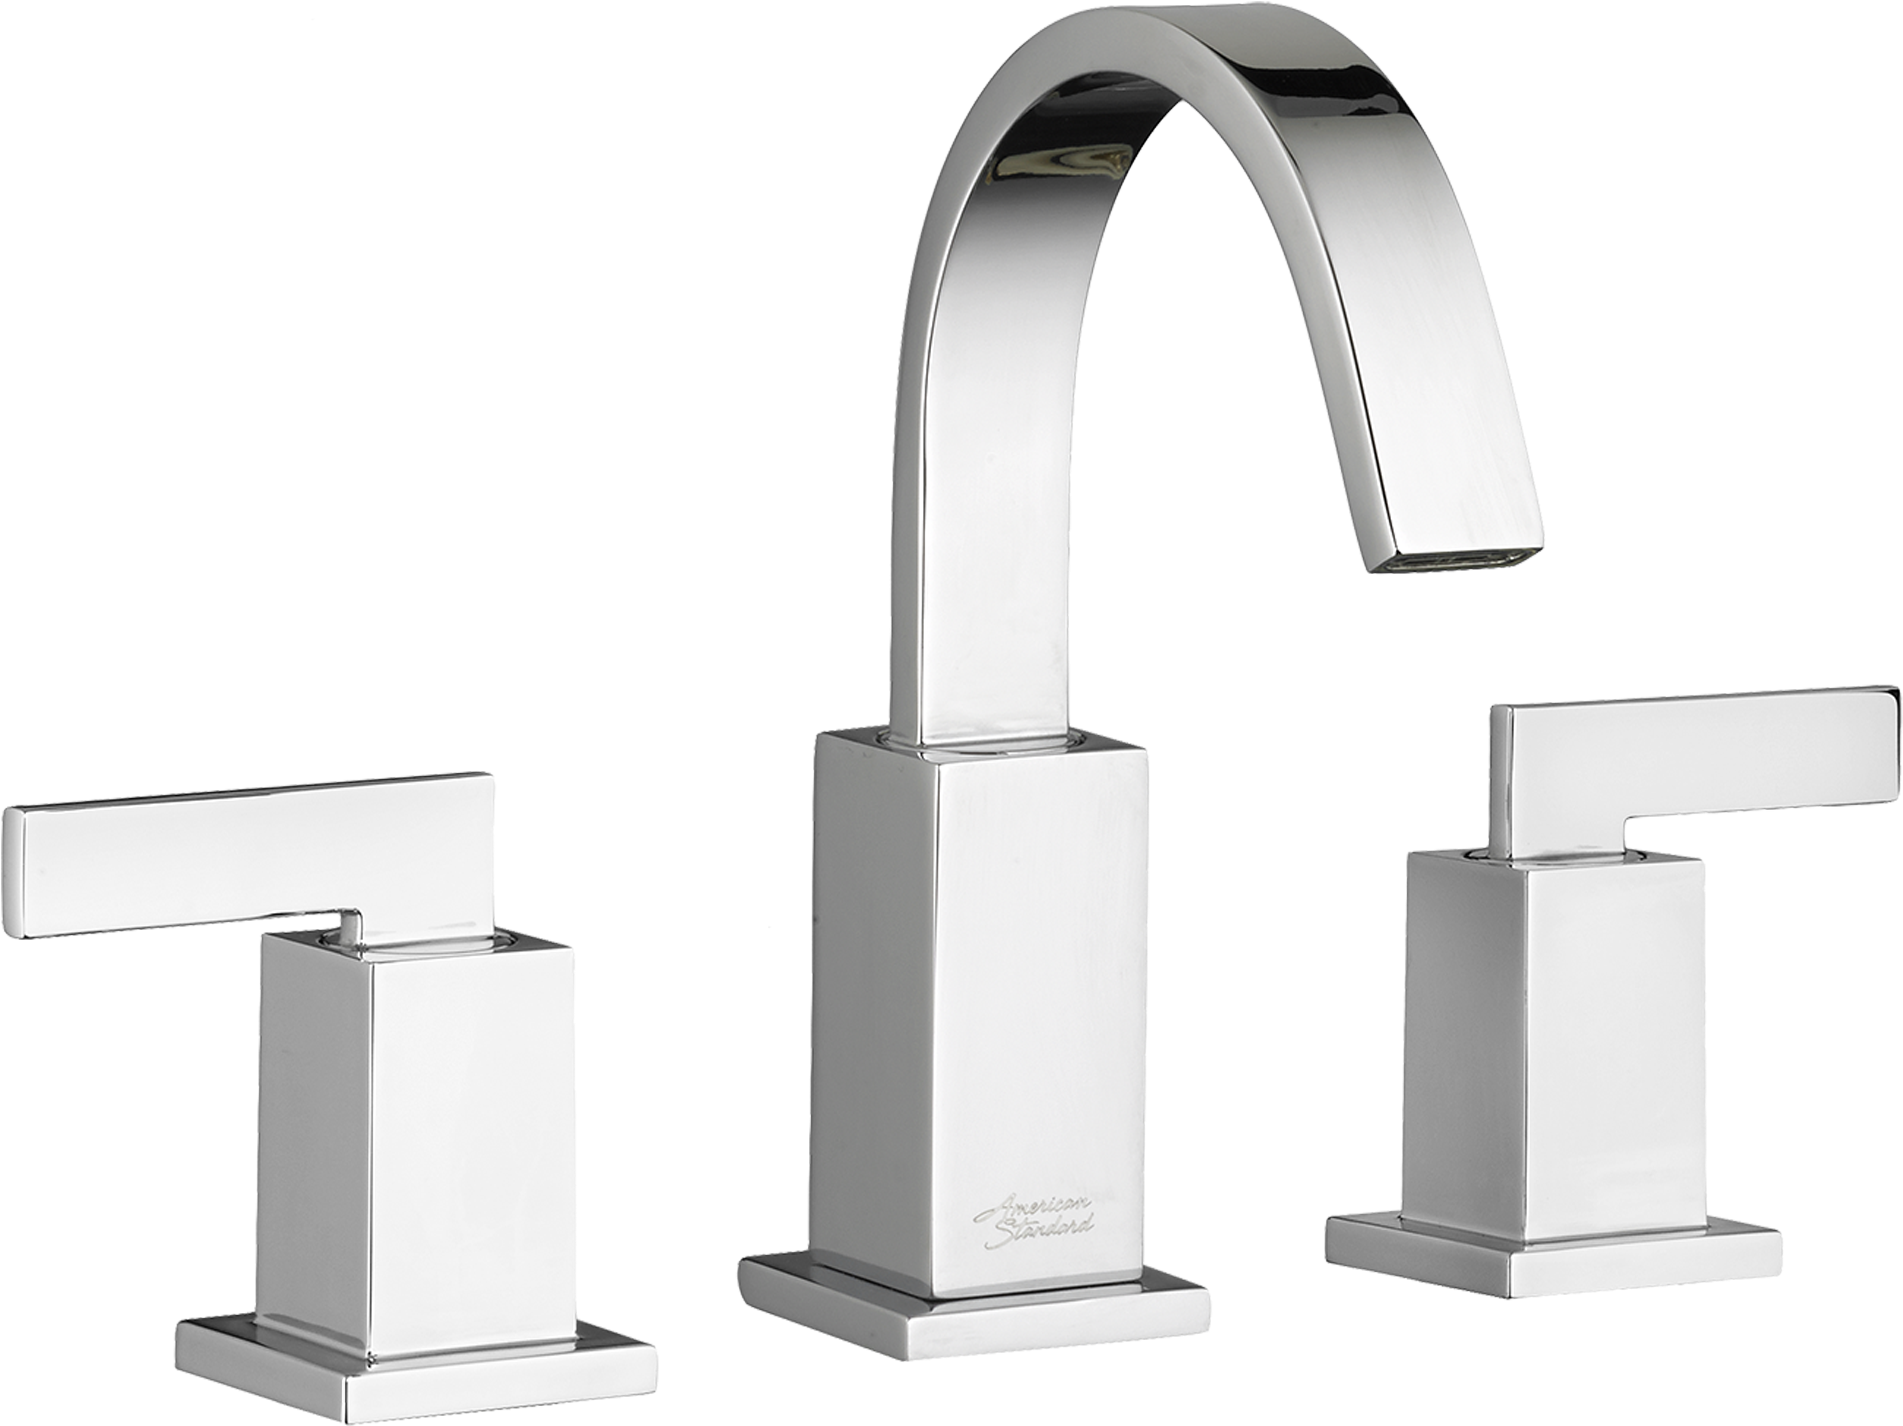 Download Square Bathroom Sink Faucet Png Image With No Background Pngkeycom